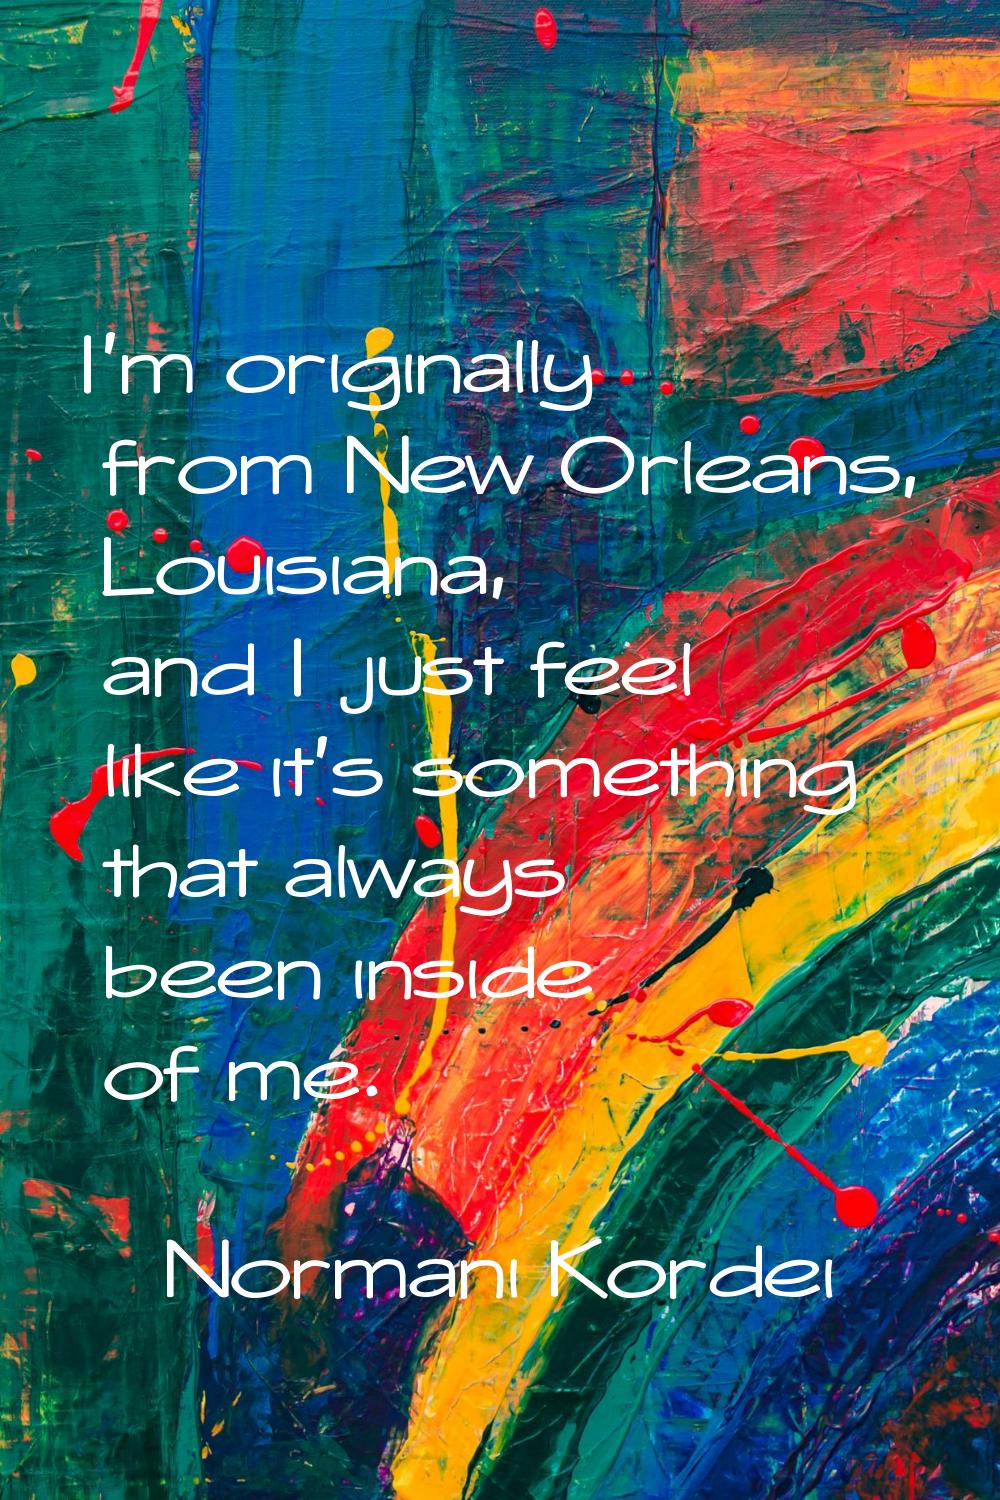 I'm originally from New Orleans, Louisiana, and I just feel like it's something that always been in